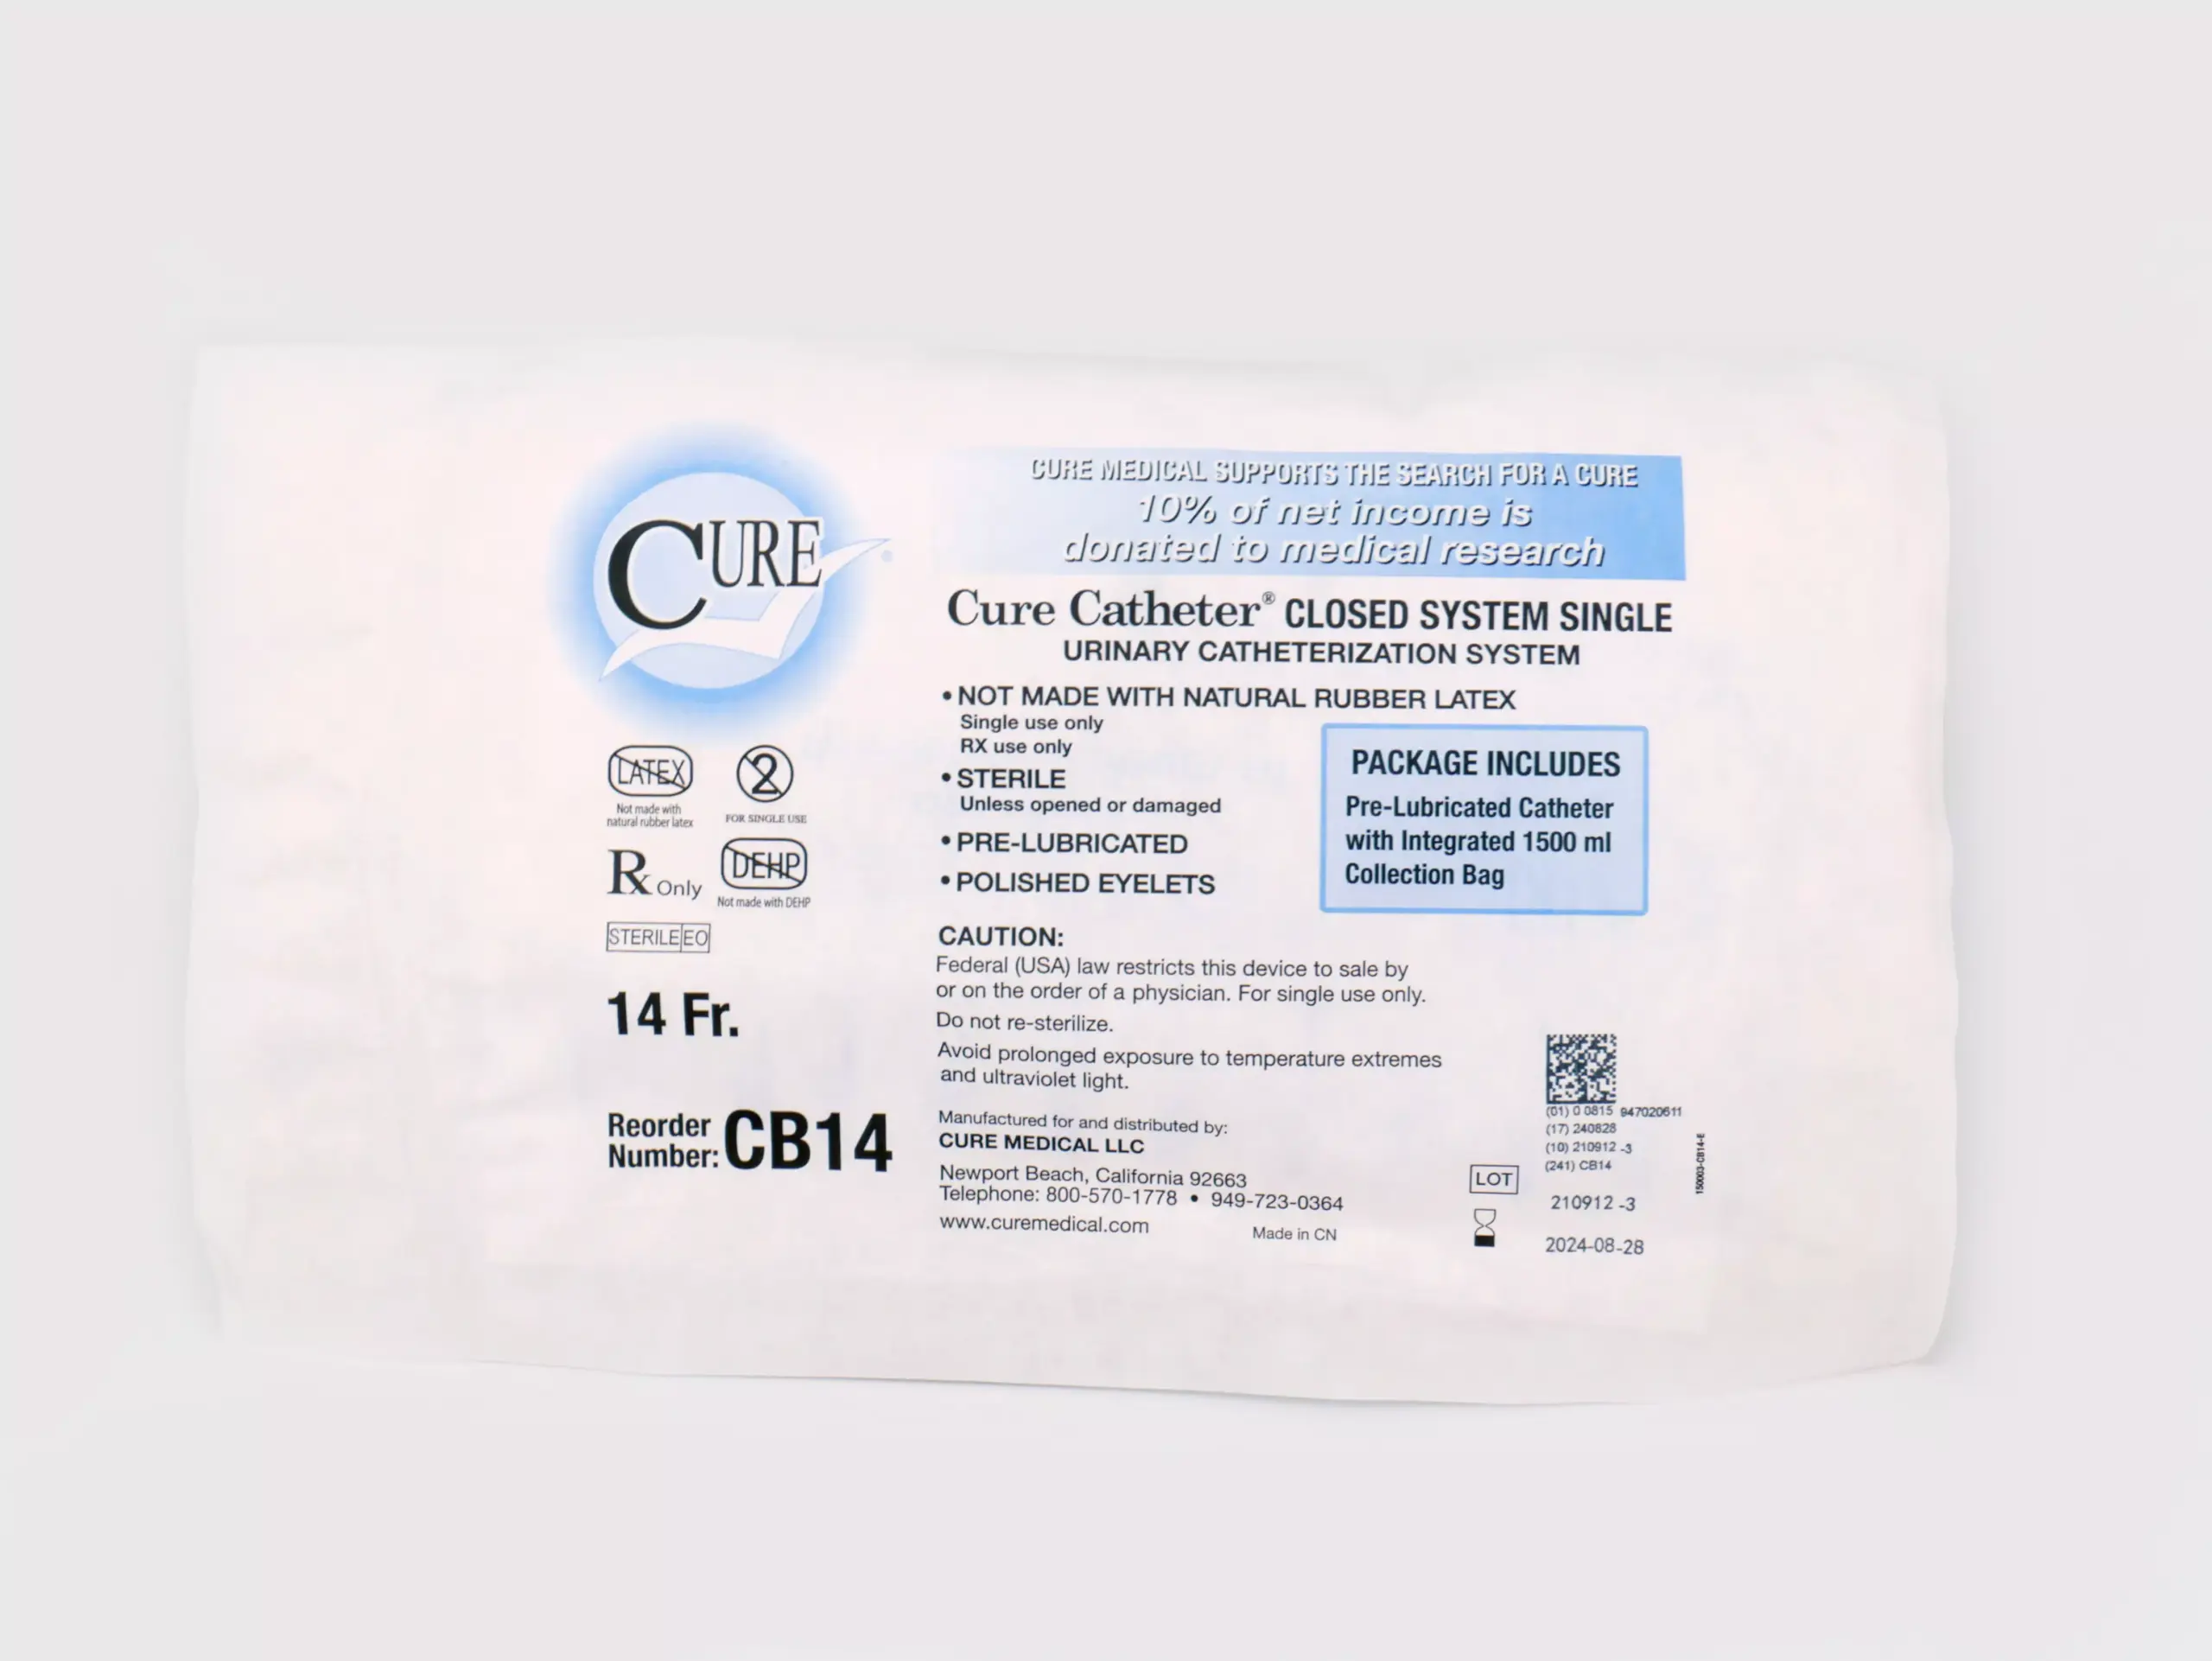 Photograph of a package of RA Fischer Co.'s Cure Catheters, White bag on white background. Package reads "Cure Catheter Closed system single. Urinary catheterization system. Note made with natural rubber latex. Sterile. Pre-lubricated. Polished eyelets. Package includes pre-lubricated catheter with integrated 1500 ml collection bag."